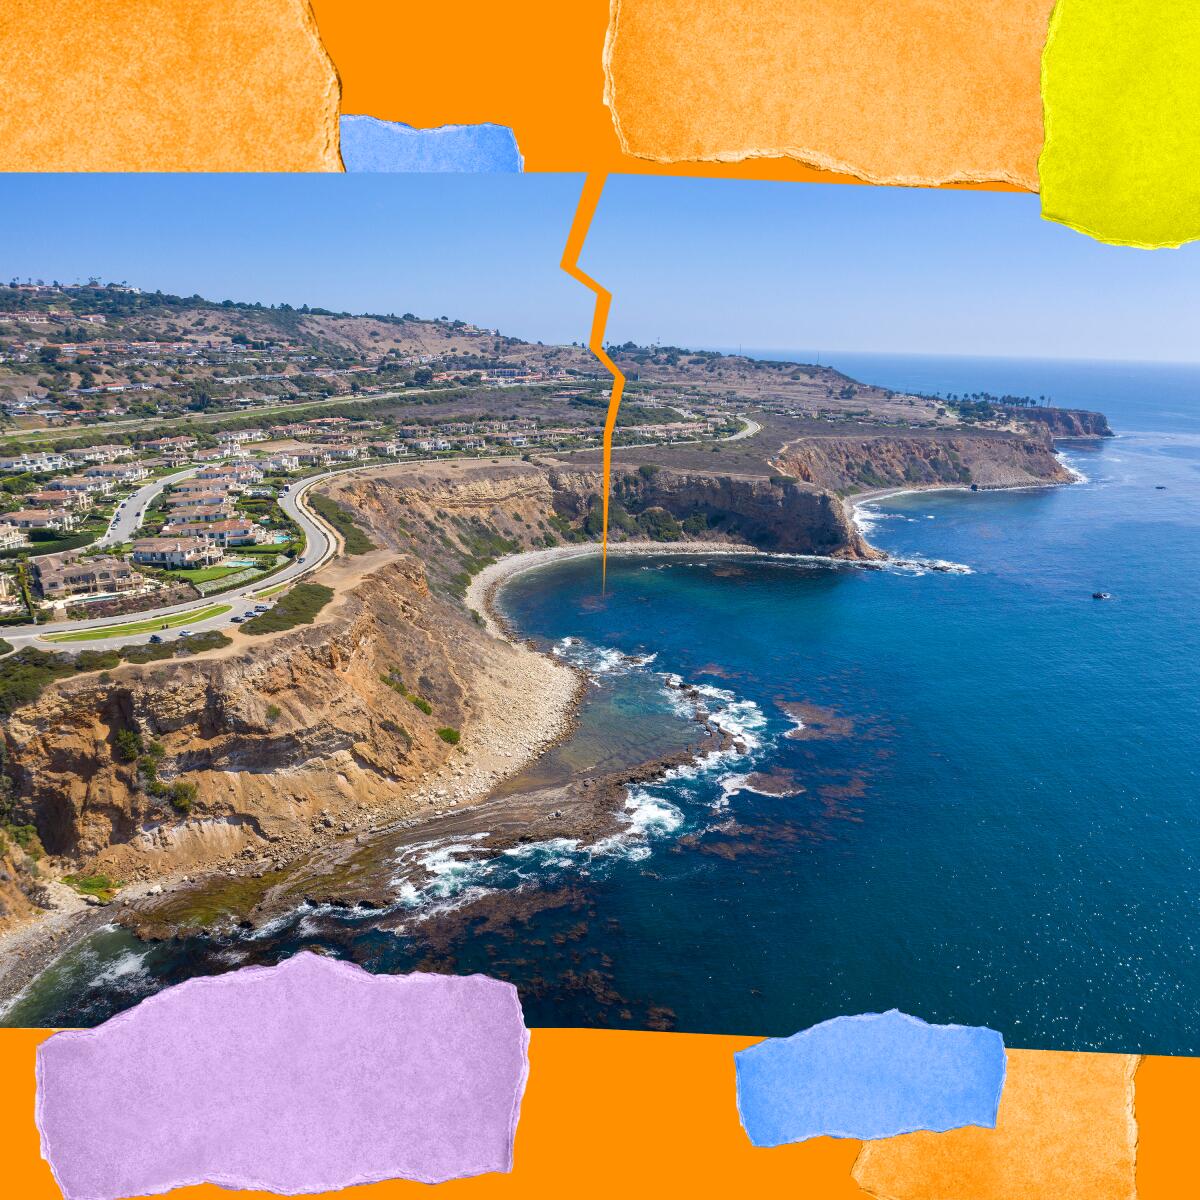 A new study shows the Palos Verdes fault zone may be just as dangerous as the San Andreas fault.